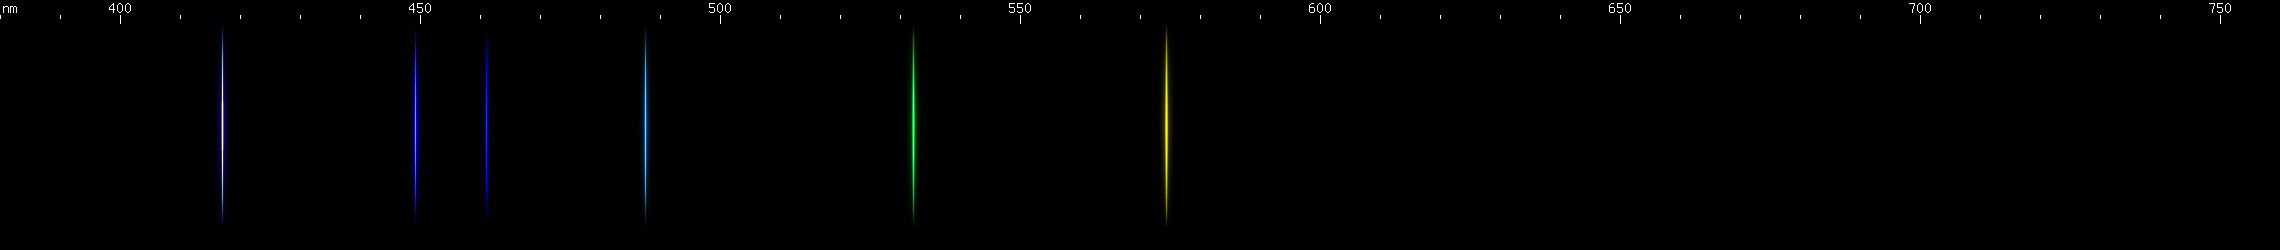 Spectral Lines of Polonium